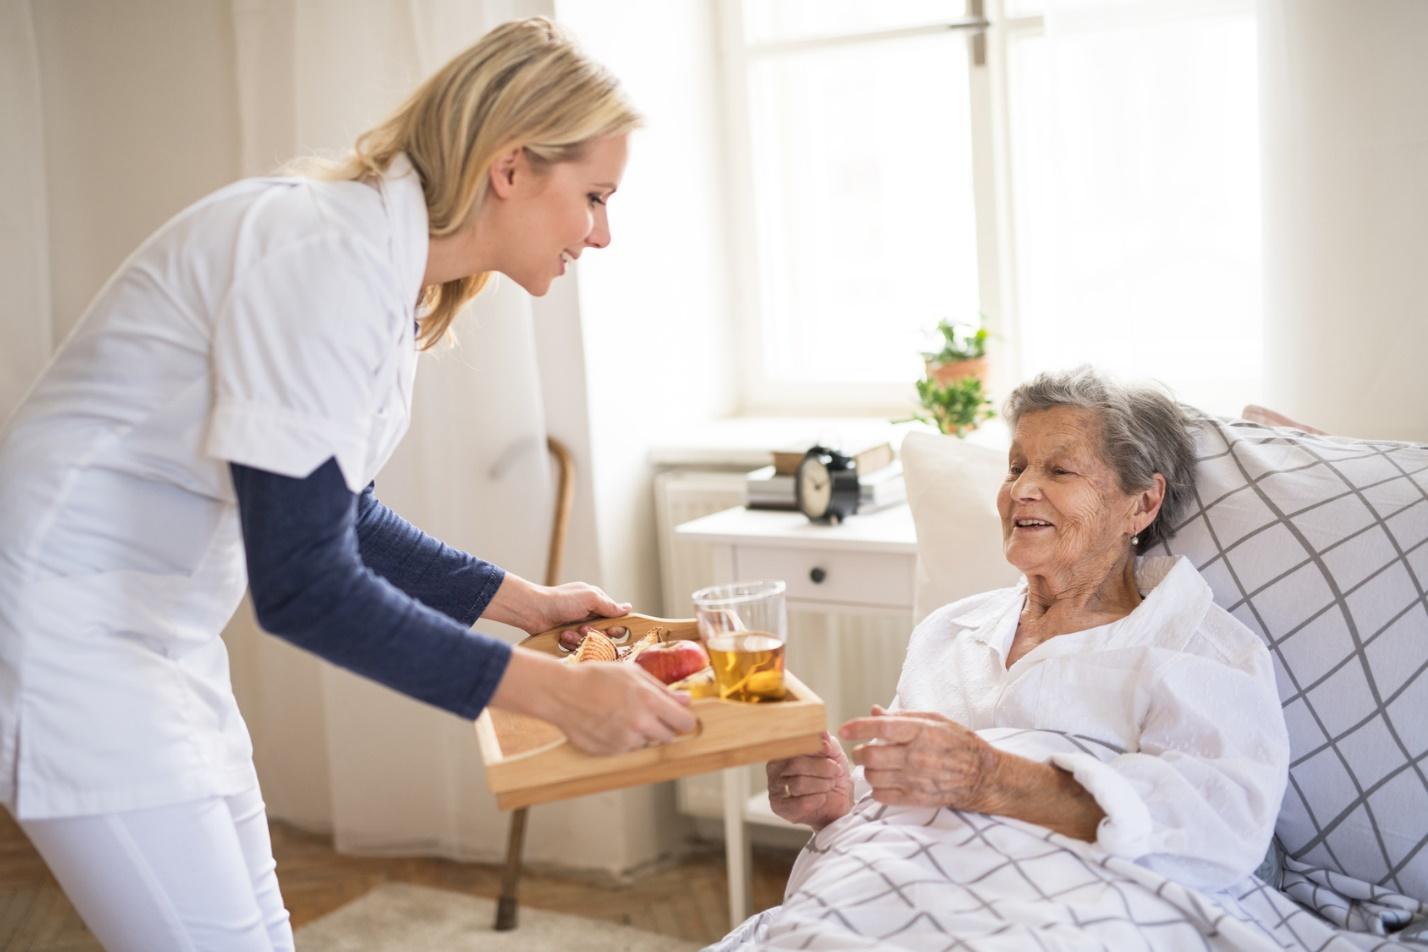 What Types of Senior Care Are Available to My Family?